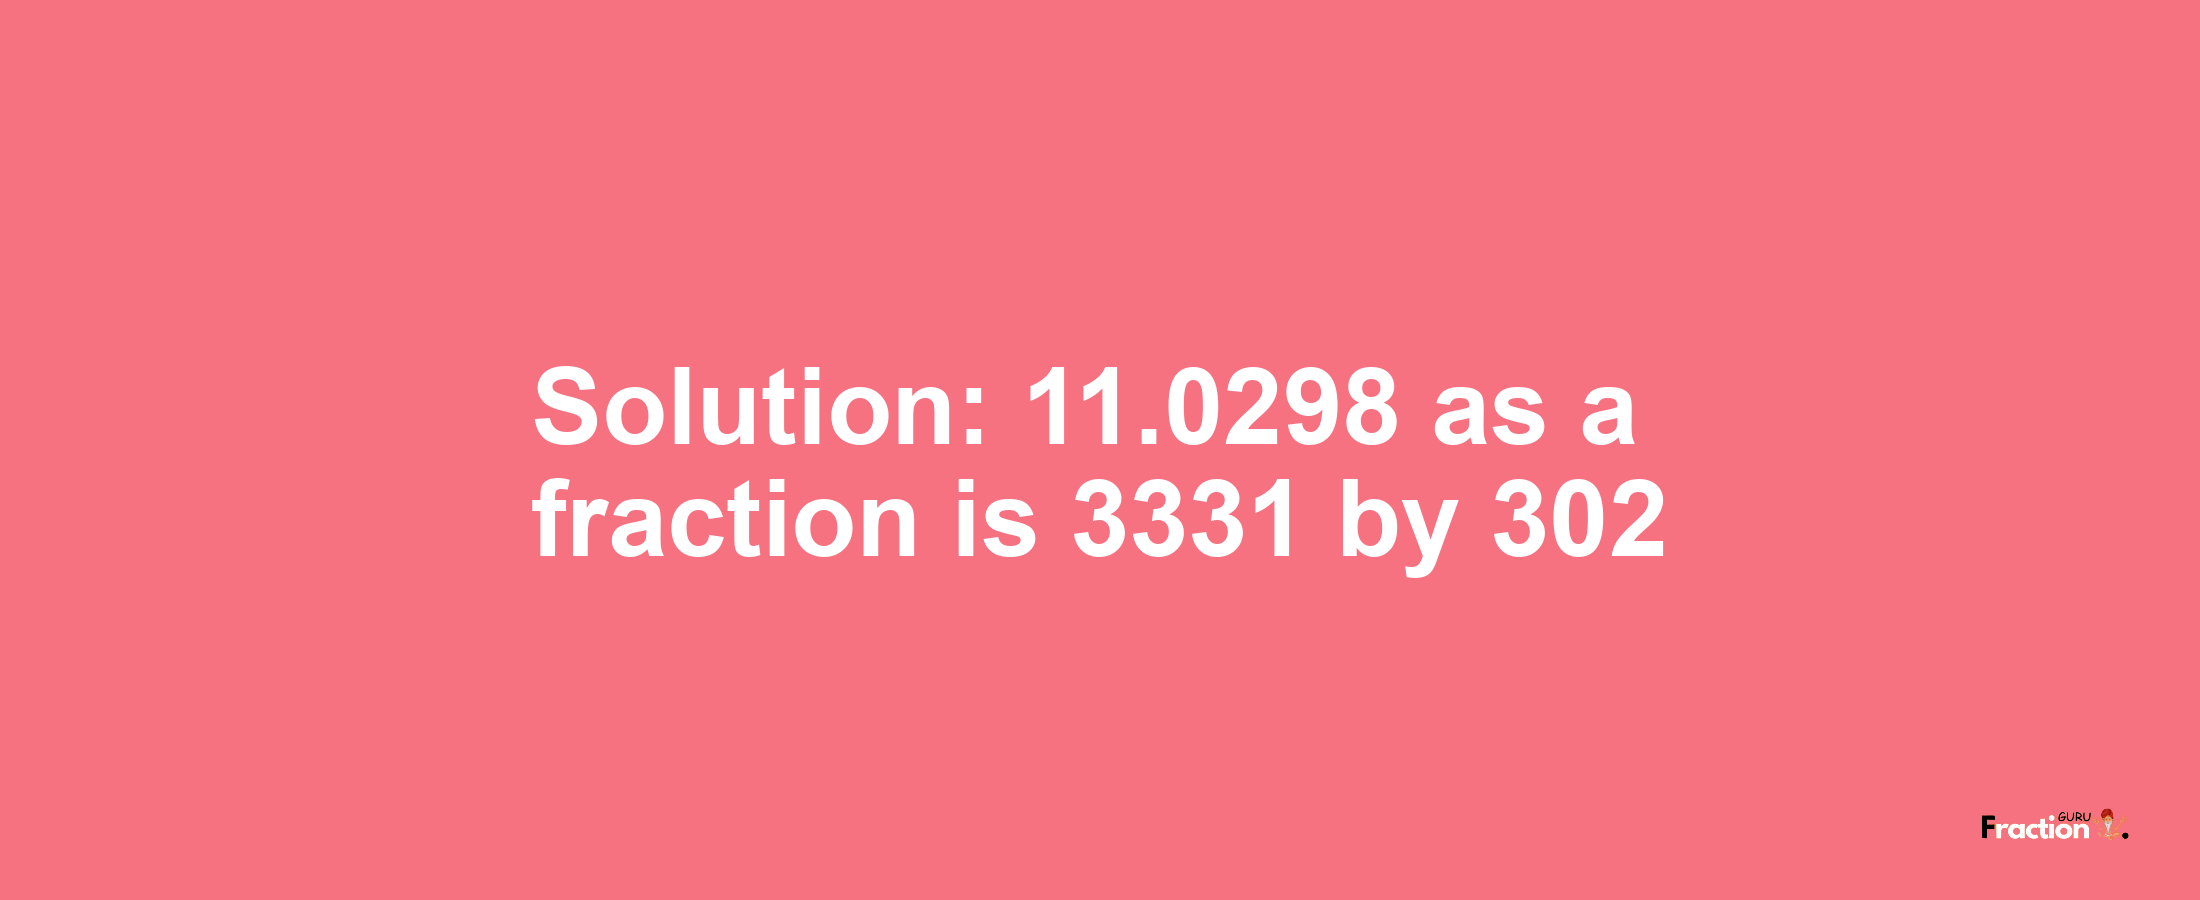 Solution:11.0298 as a fraction is 3331/302